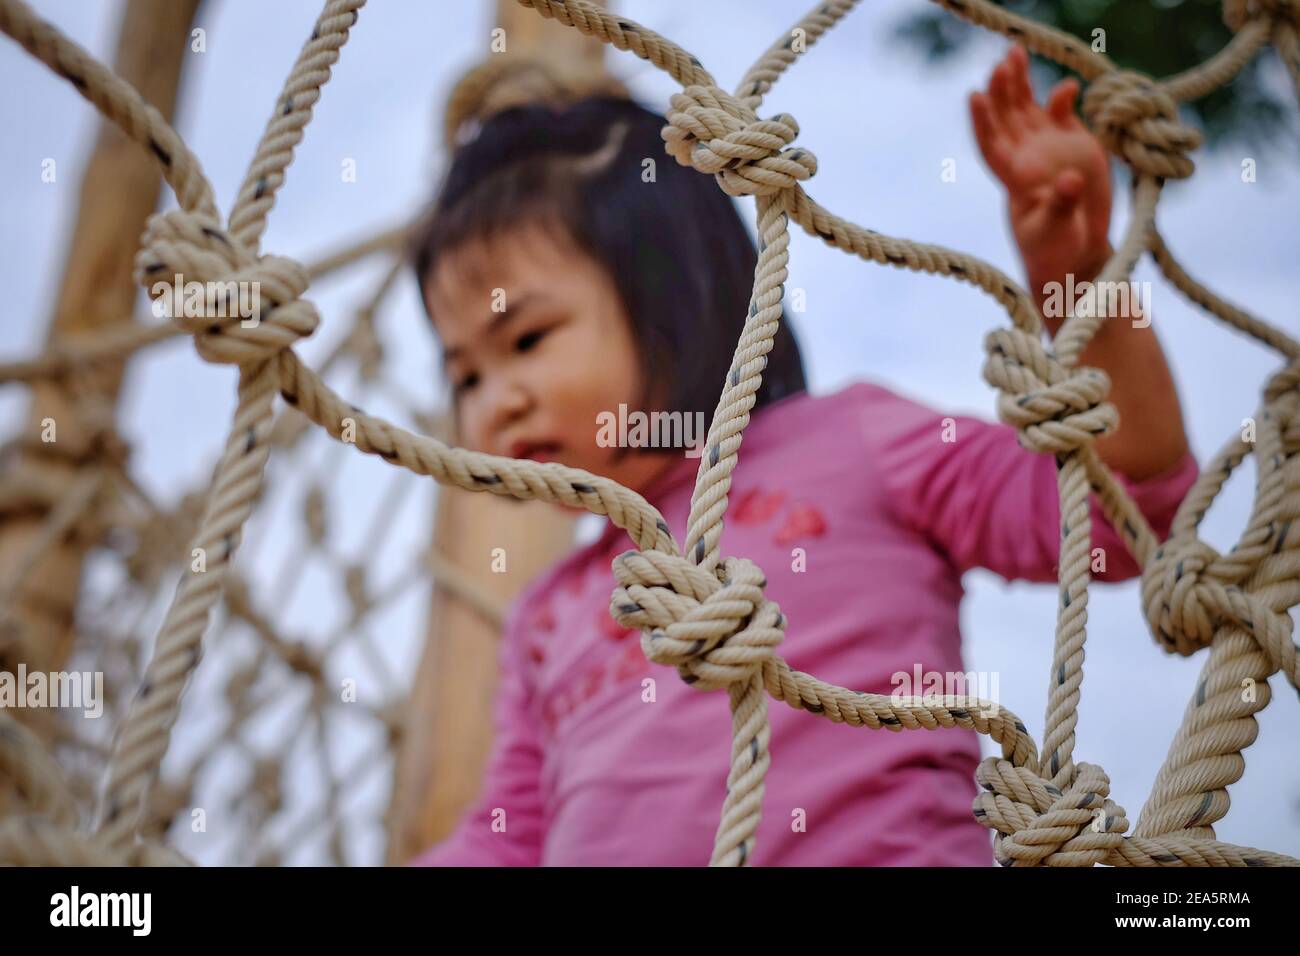 active, activity, adorable, adventure, asia, asian, baby, balance, beautiful, blur, brave, cable, cheerful, child, childhood, climbing, course, cute, Stock Photo